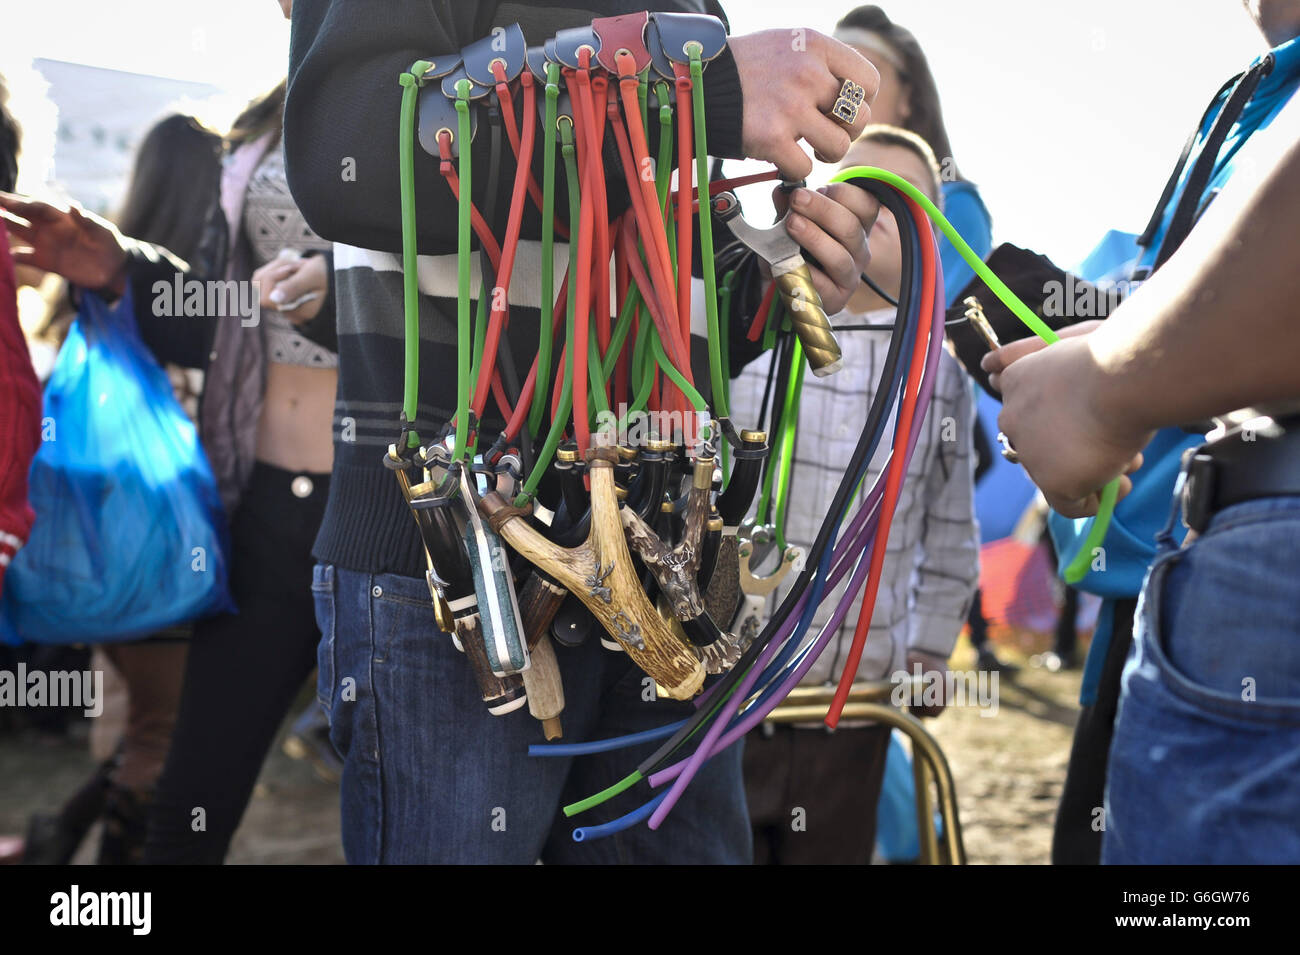 People browse hand-made slingshots and catapults from a wandering trader at the Stow-on-the-Wold Horse Fair in Gloucestershire, where members of the traveling community meet up and trade goods, the event has existed for hundreds of years. Stock Photo